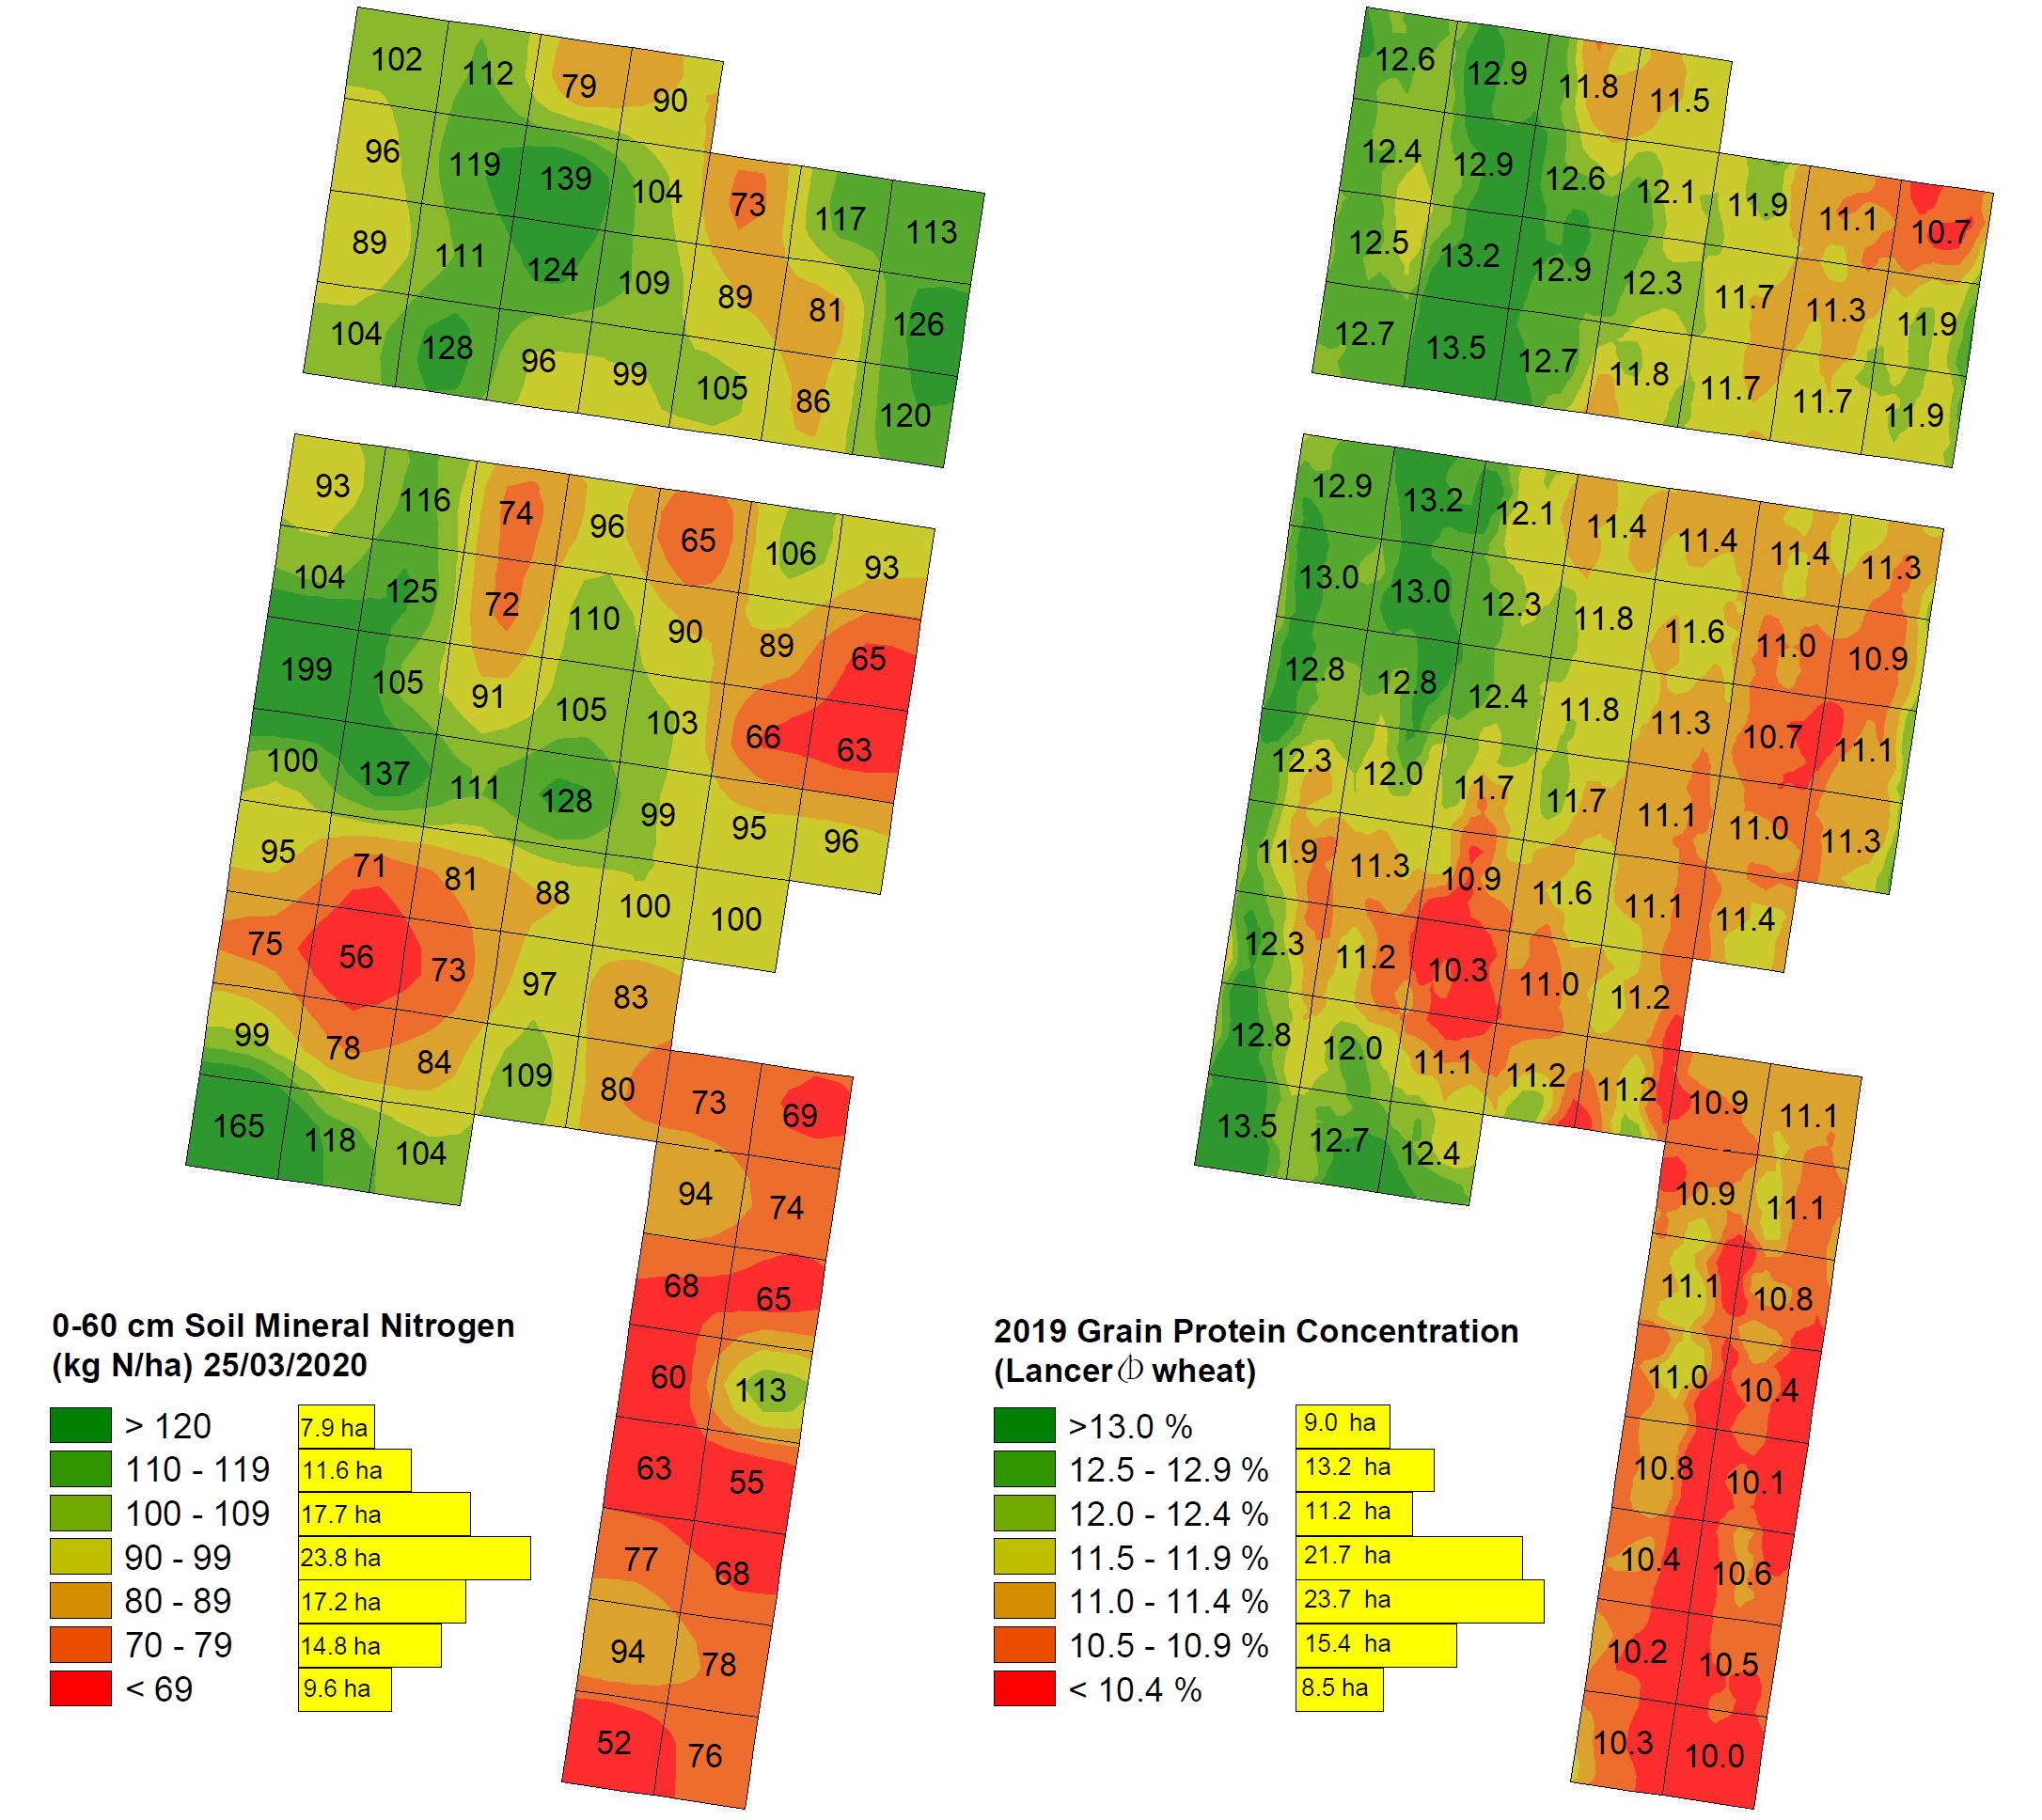 Figure 3 is a heat map of Rannock site 0-60 cm SMN (kg N/ha) sampled 25/03/2020 (left) and 2019 wheat protein% (right). Pearson correlation coefficient (r) = 0.59, P < 0.0001. The missing section between the two blocks is the location of an old fence line which was excluded from the sampling plan. Each cell size is 108 x 108 m, total area = 102.7 ha.